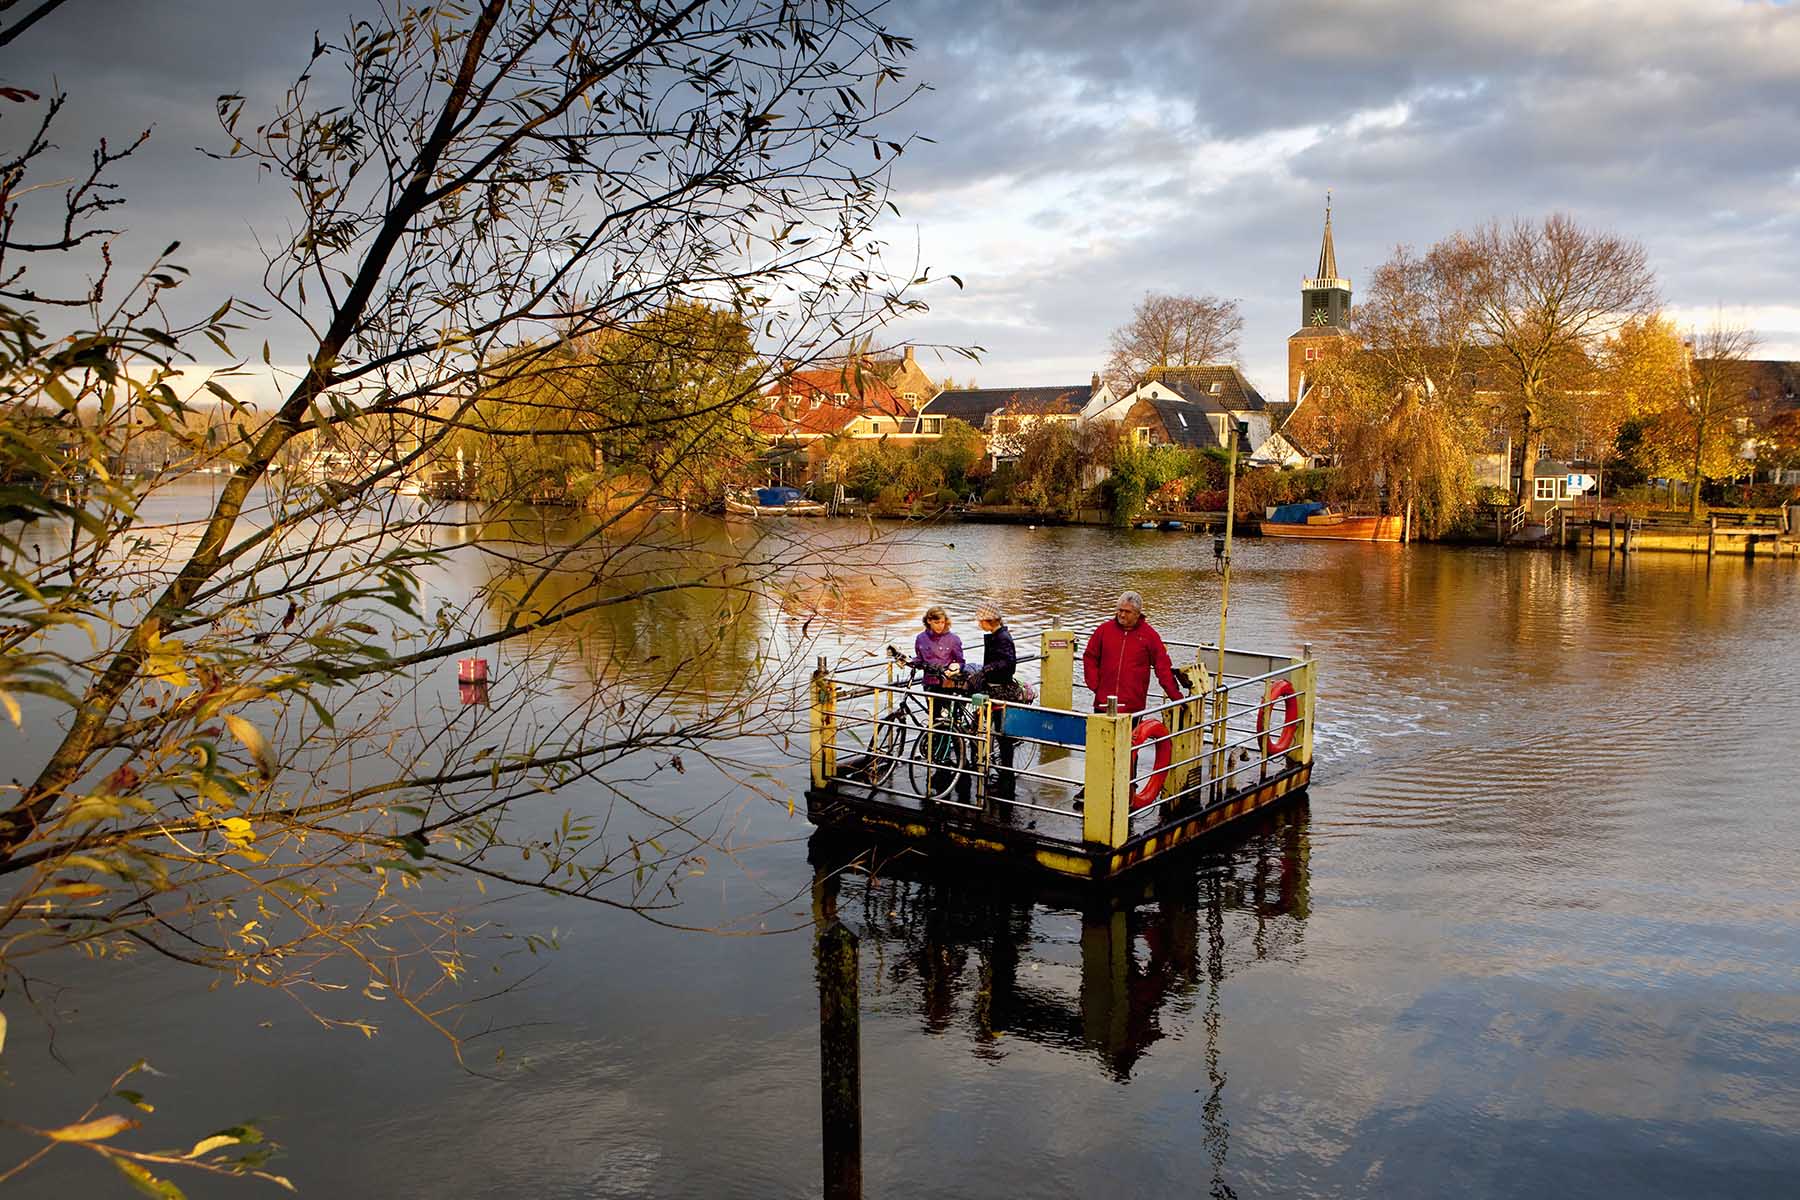 Group of people stnading on a small pond ferry to cross a river in the Netherlands.